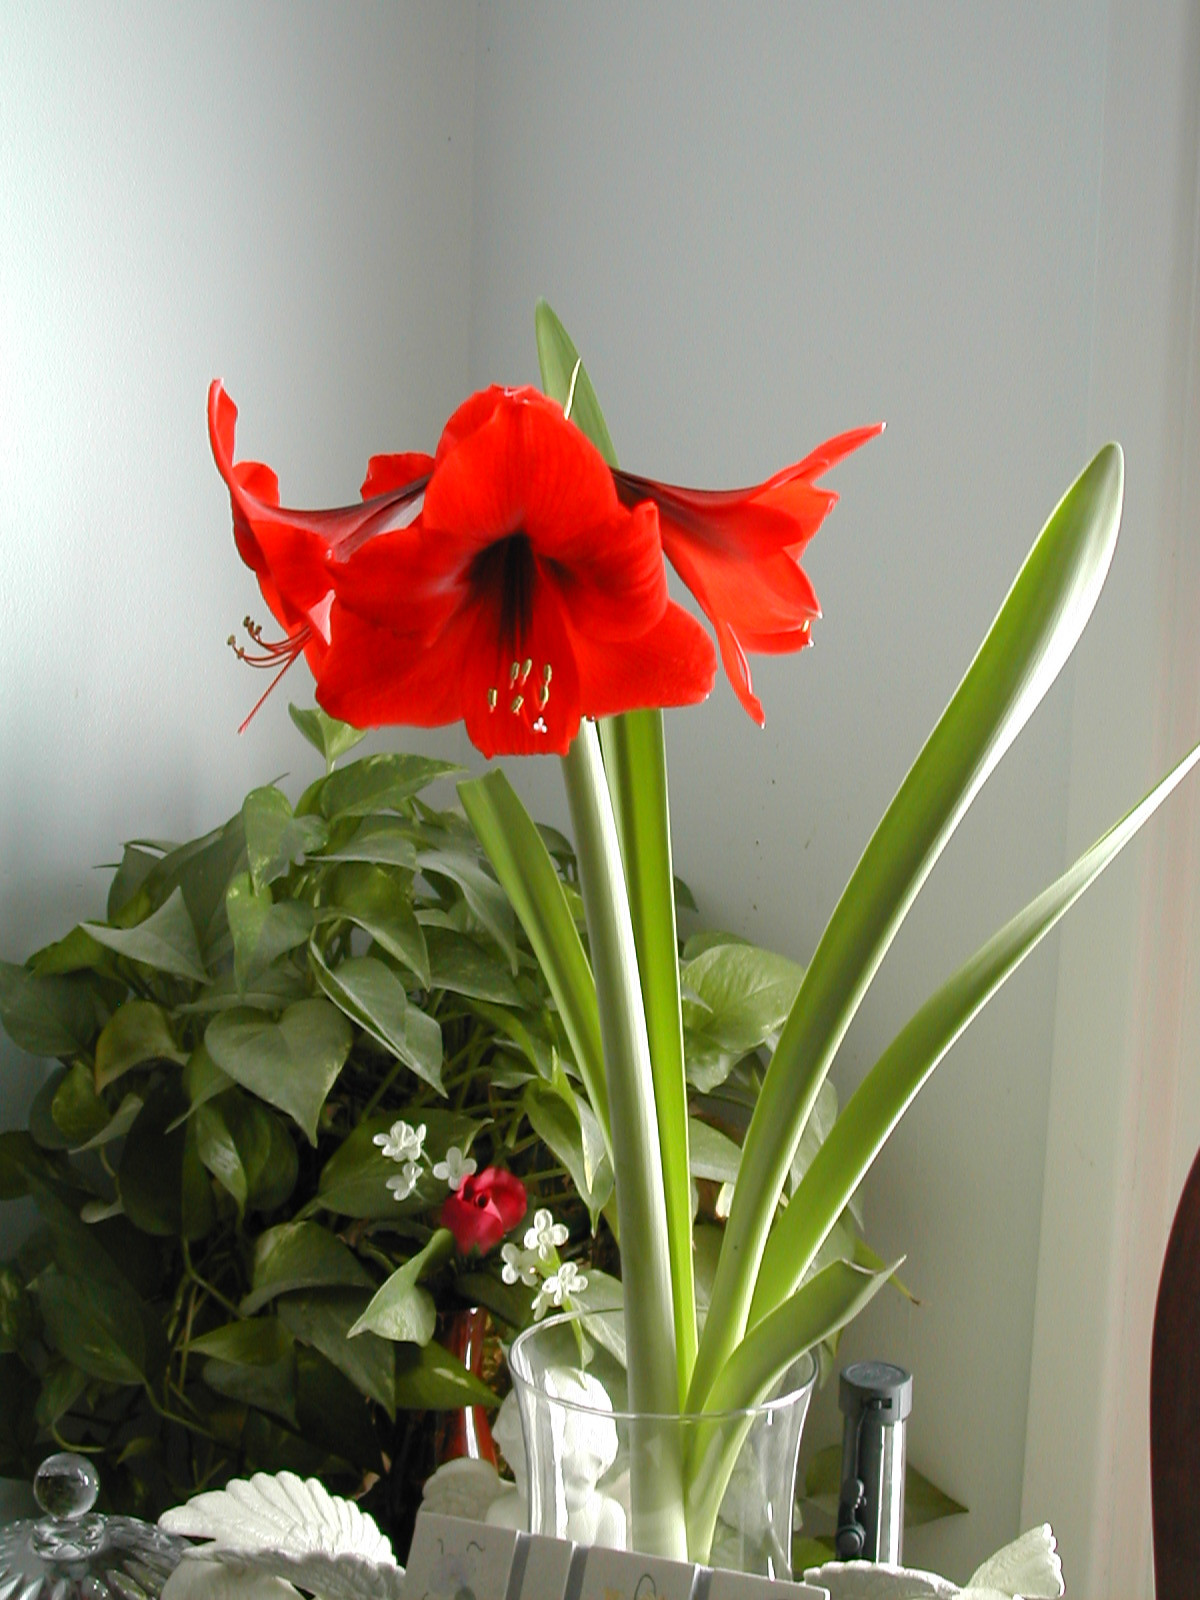 Red Christmas Flower
 The Other Red Christmas Flower Amaryllis Planting and